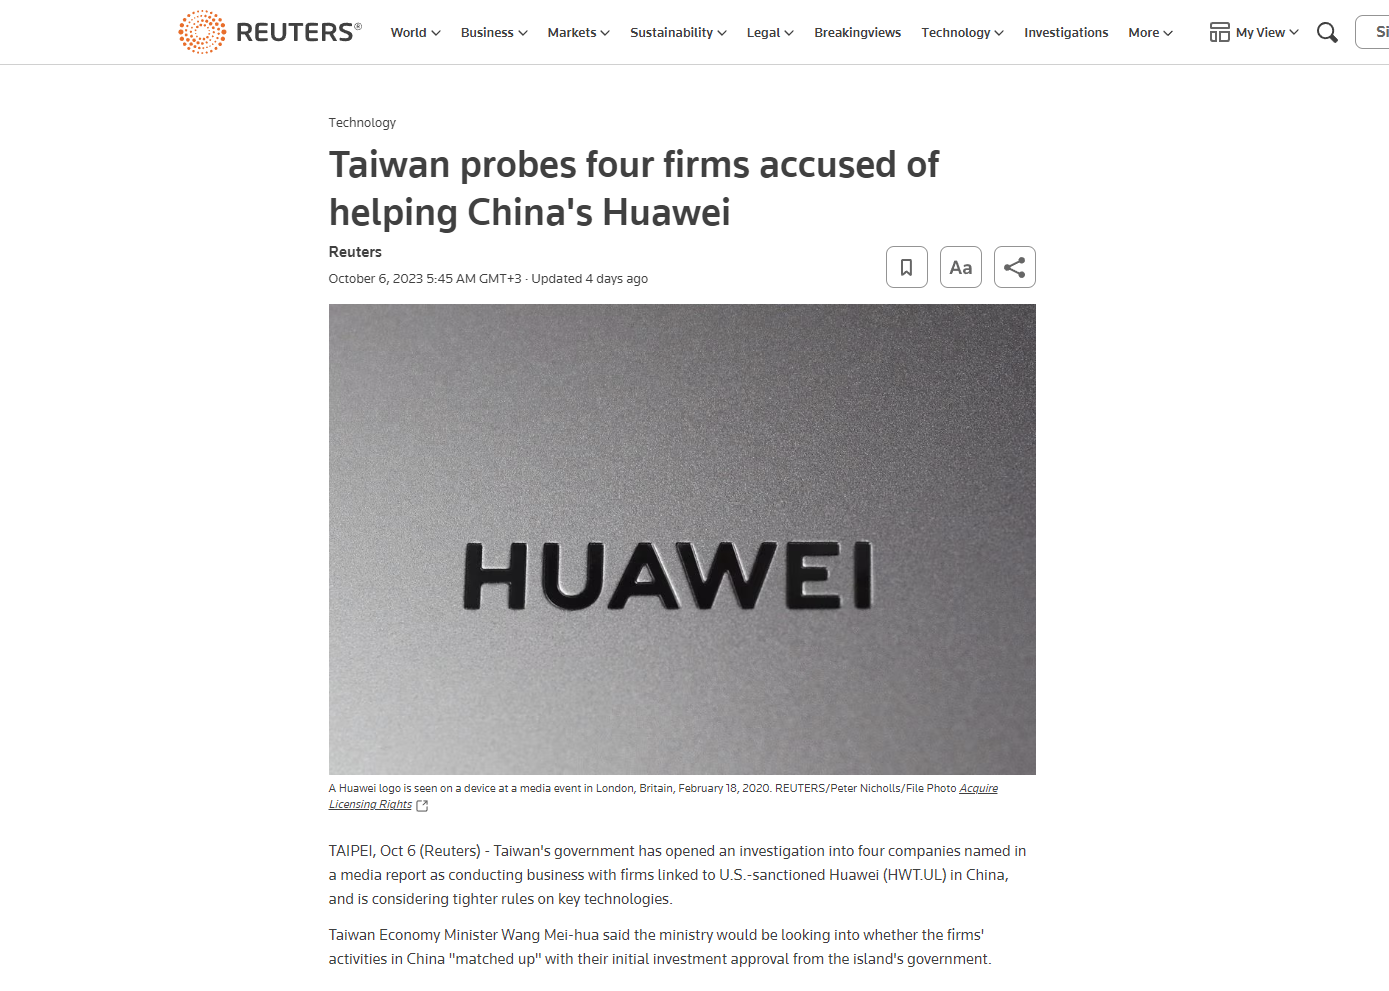 Taiwan probes four firms accused of helping China’s Huawei